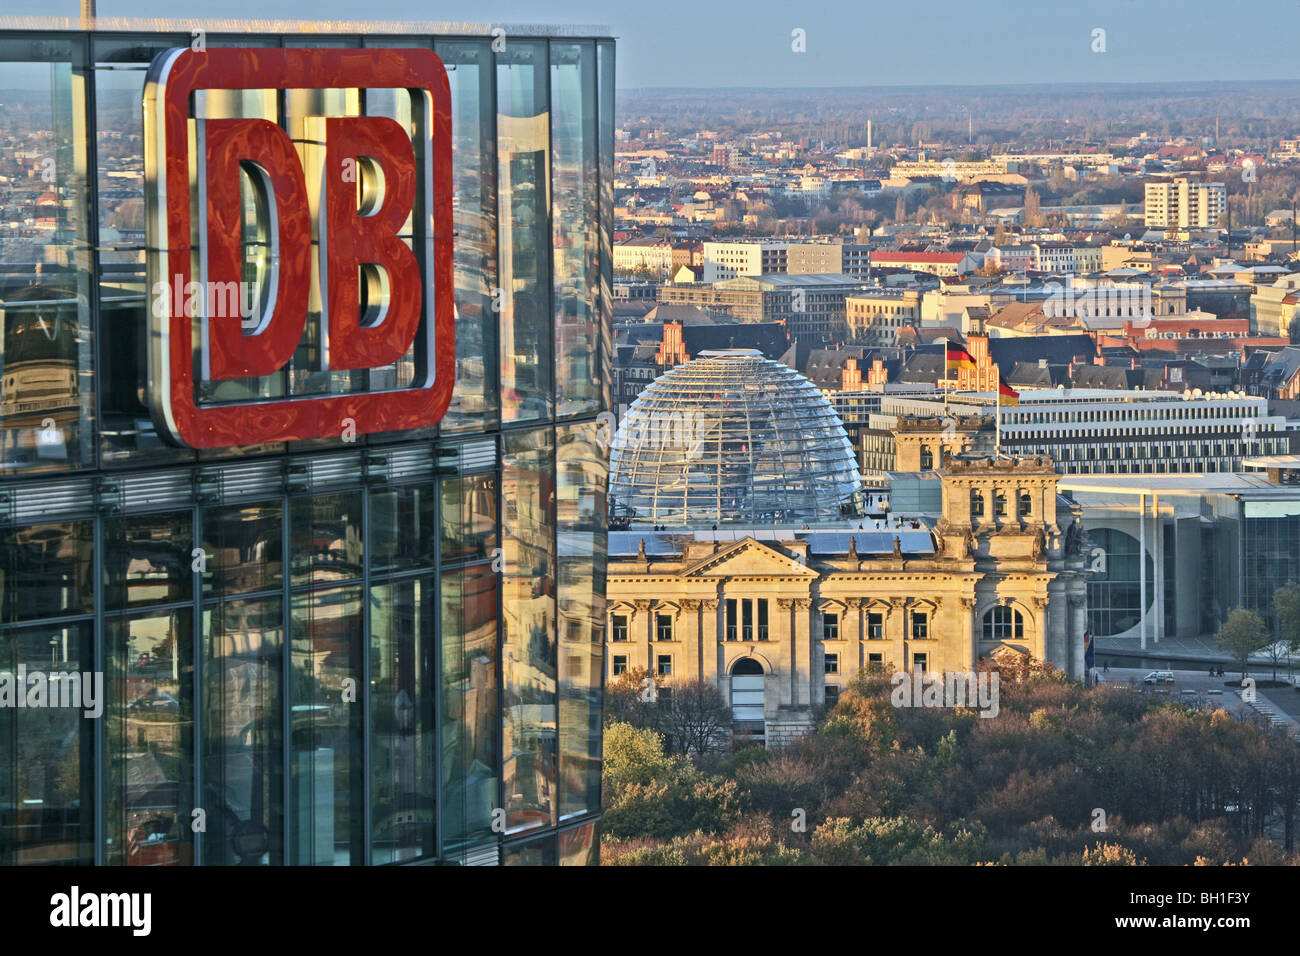 View at DB Tower, Sony Center and Reichstag, Berlin, Germany, Europe Stock Photo